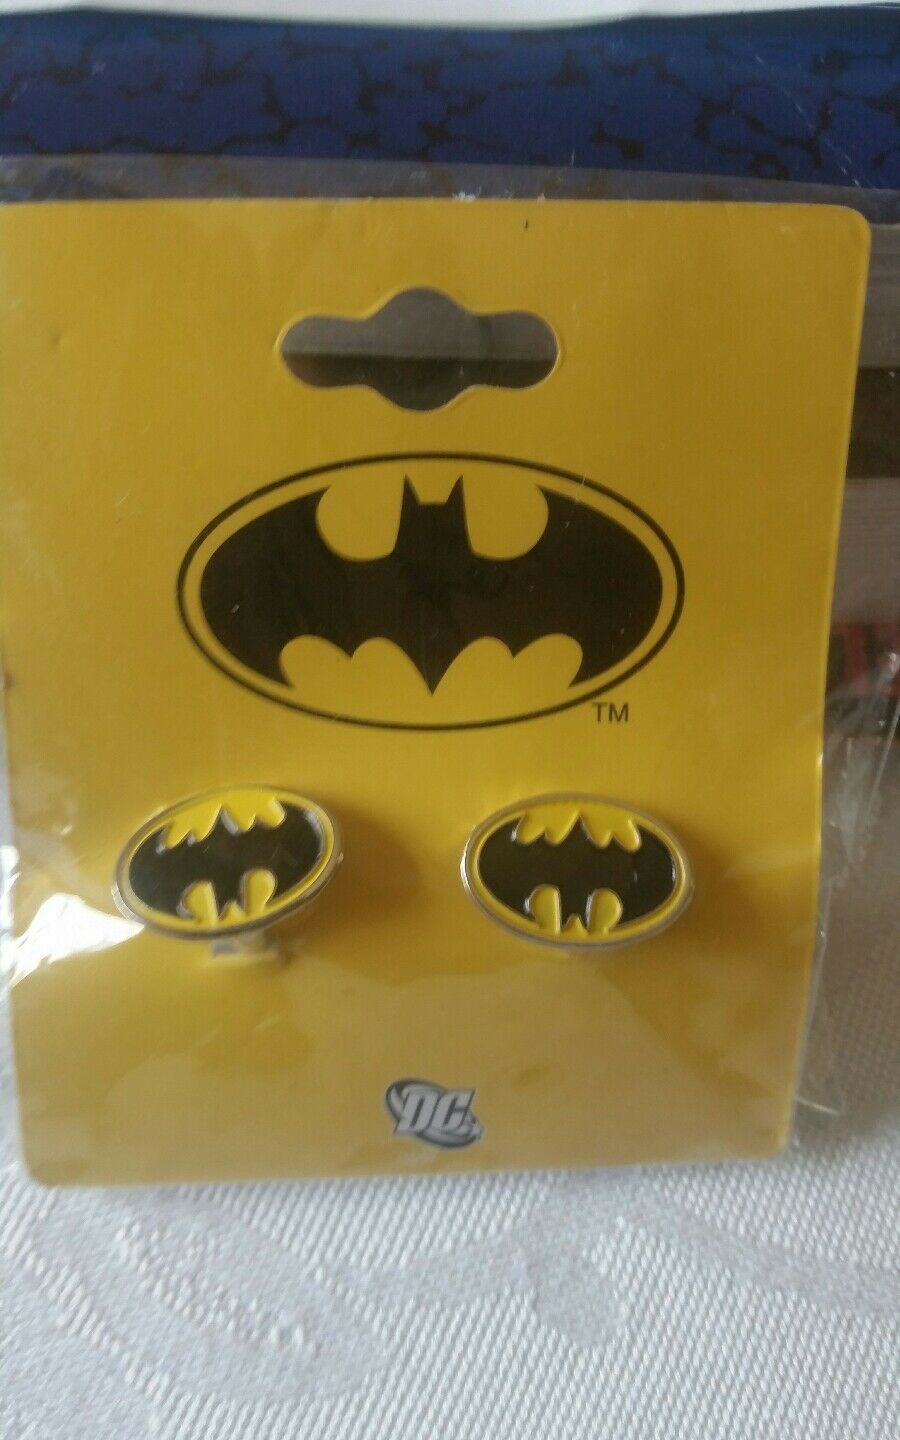 Batman Classic Black and Yellow Officially Licensed Cufflinks